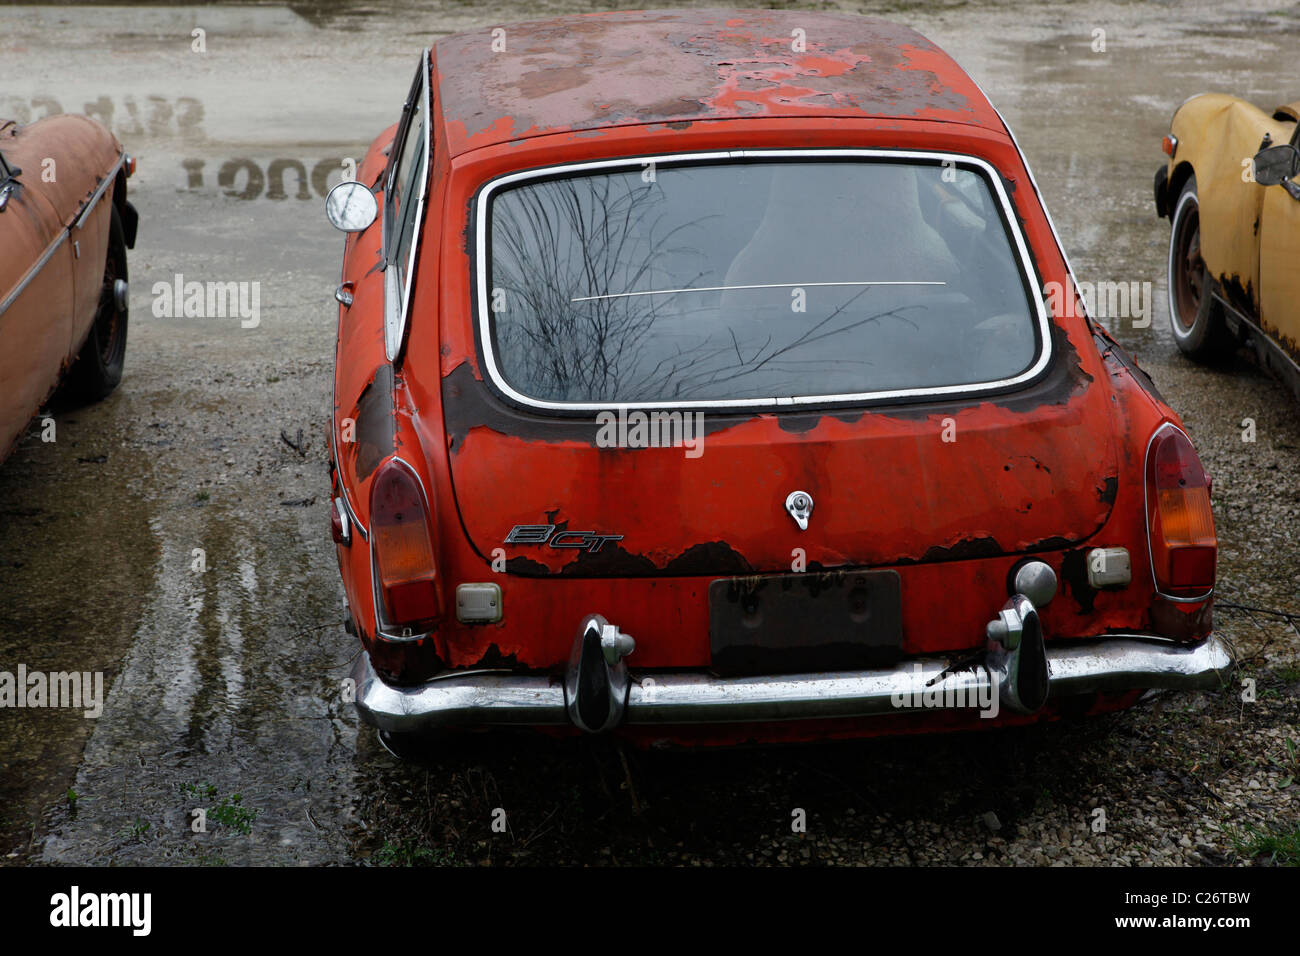 MG British Sportscar sits before auction sale next to a barn in rural Indiana. sports car BGT GT red hatchback Stock Photo